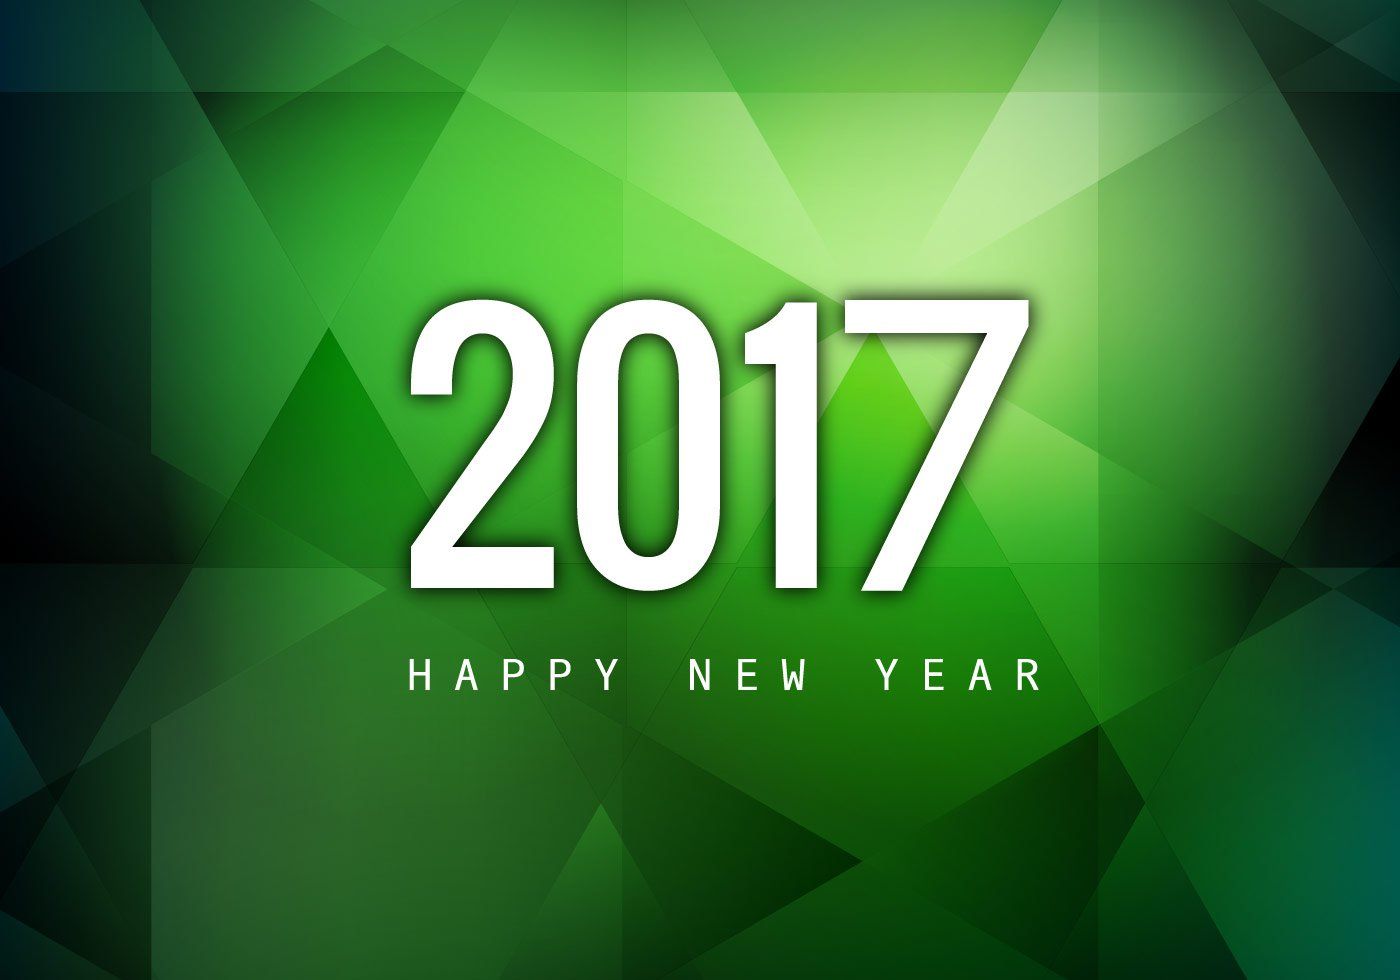 Happy New Year From Ati Companies - Happy New Year 2017 Green , HD Wallpaper & Backgrounds